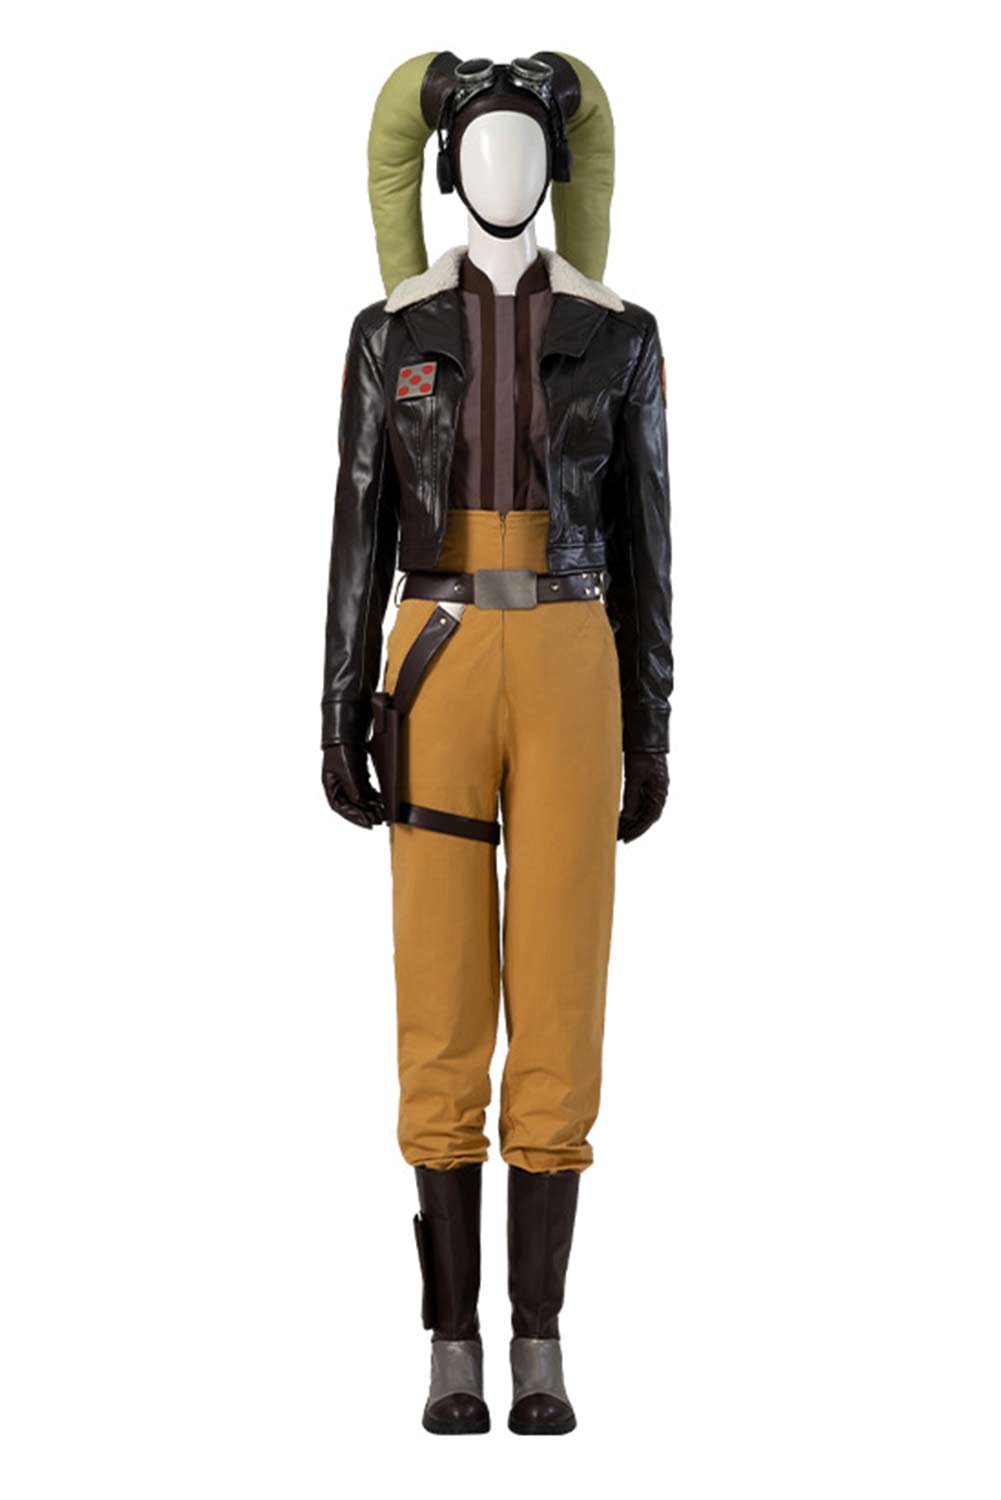 Movie Star Wars Ahsoka Tano Brown Outfits Halloween Carnival Suit Cosplay Costume